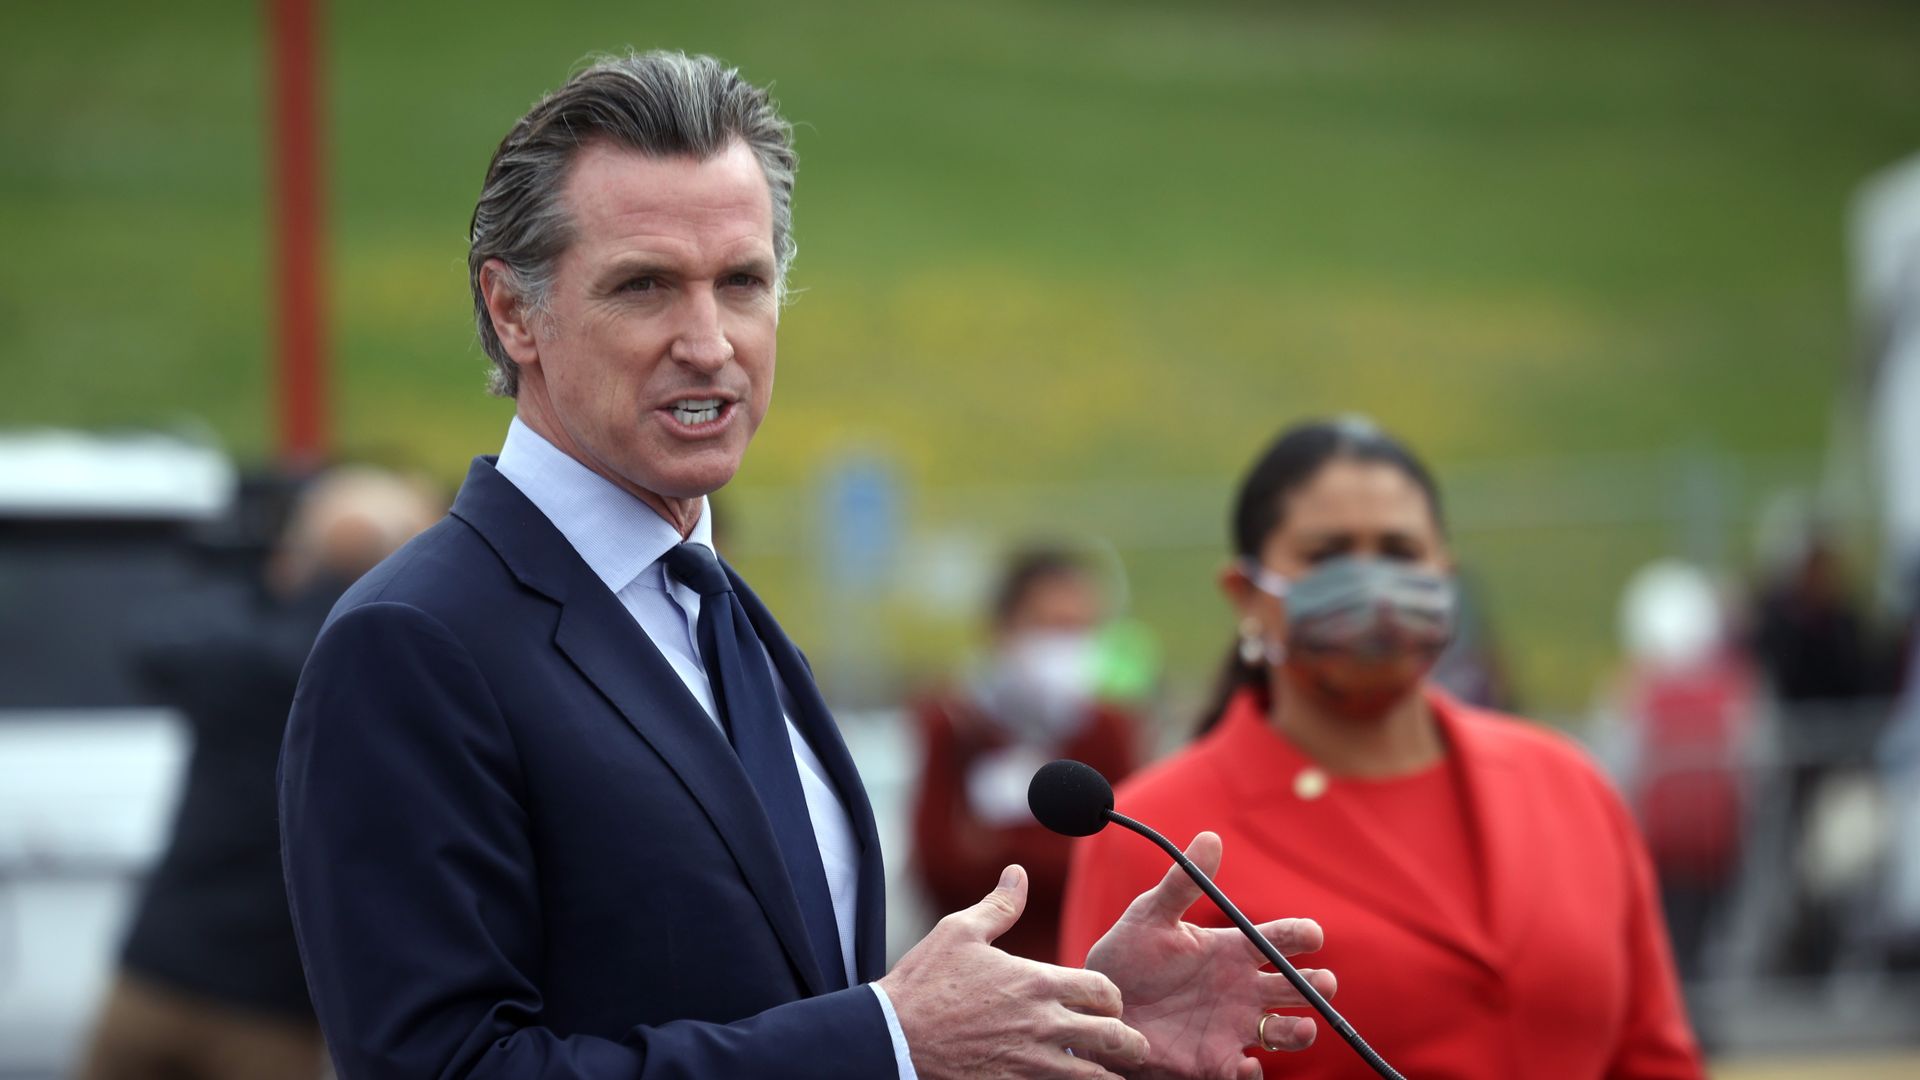 Photo of Gavin Newsom speaking into a mic and gesturing with his hands